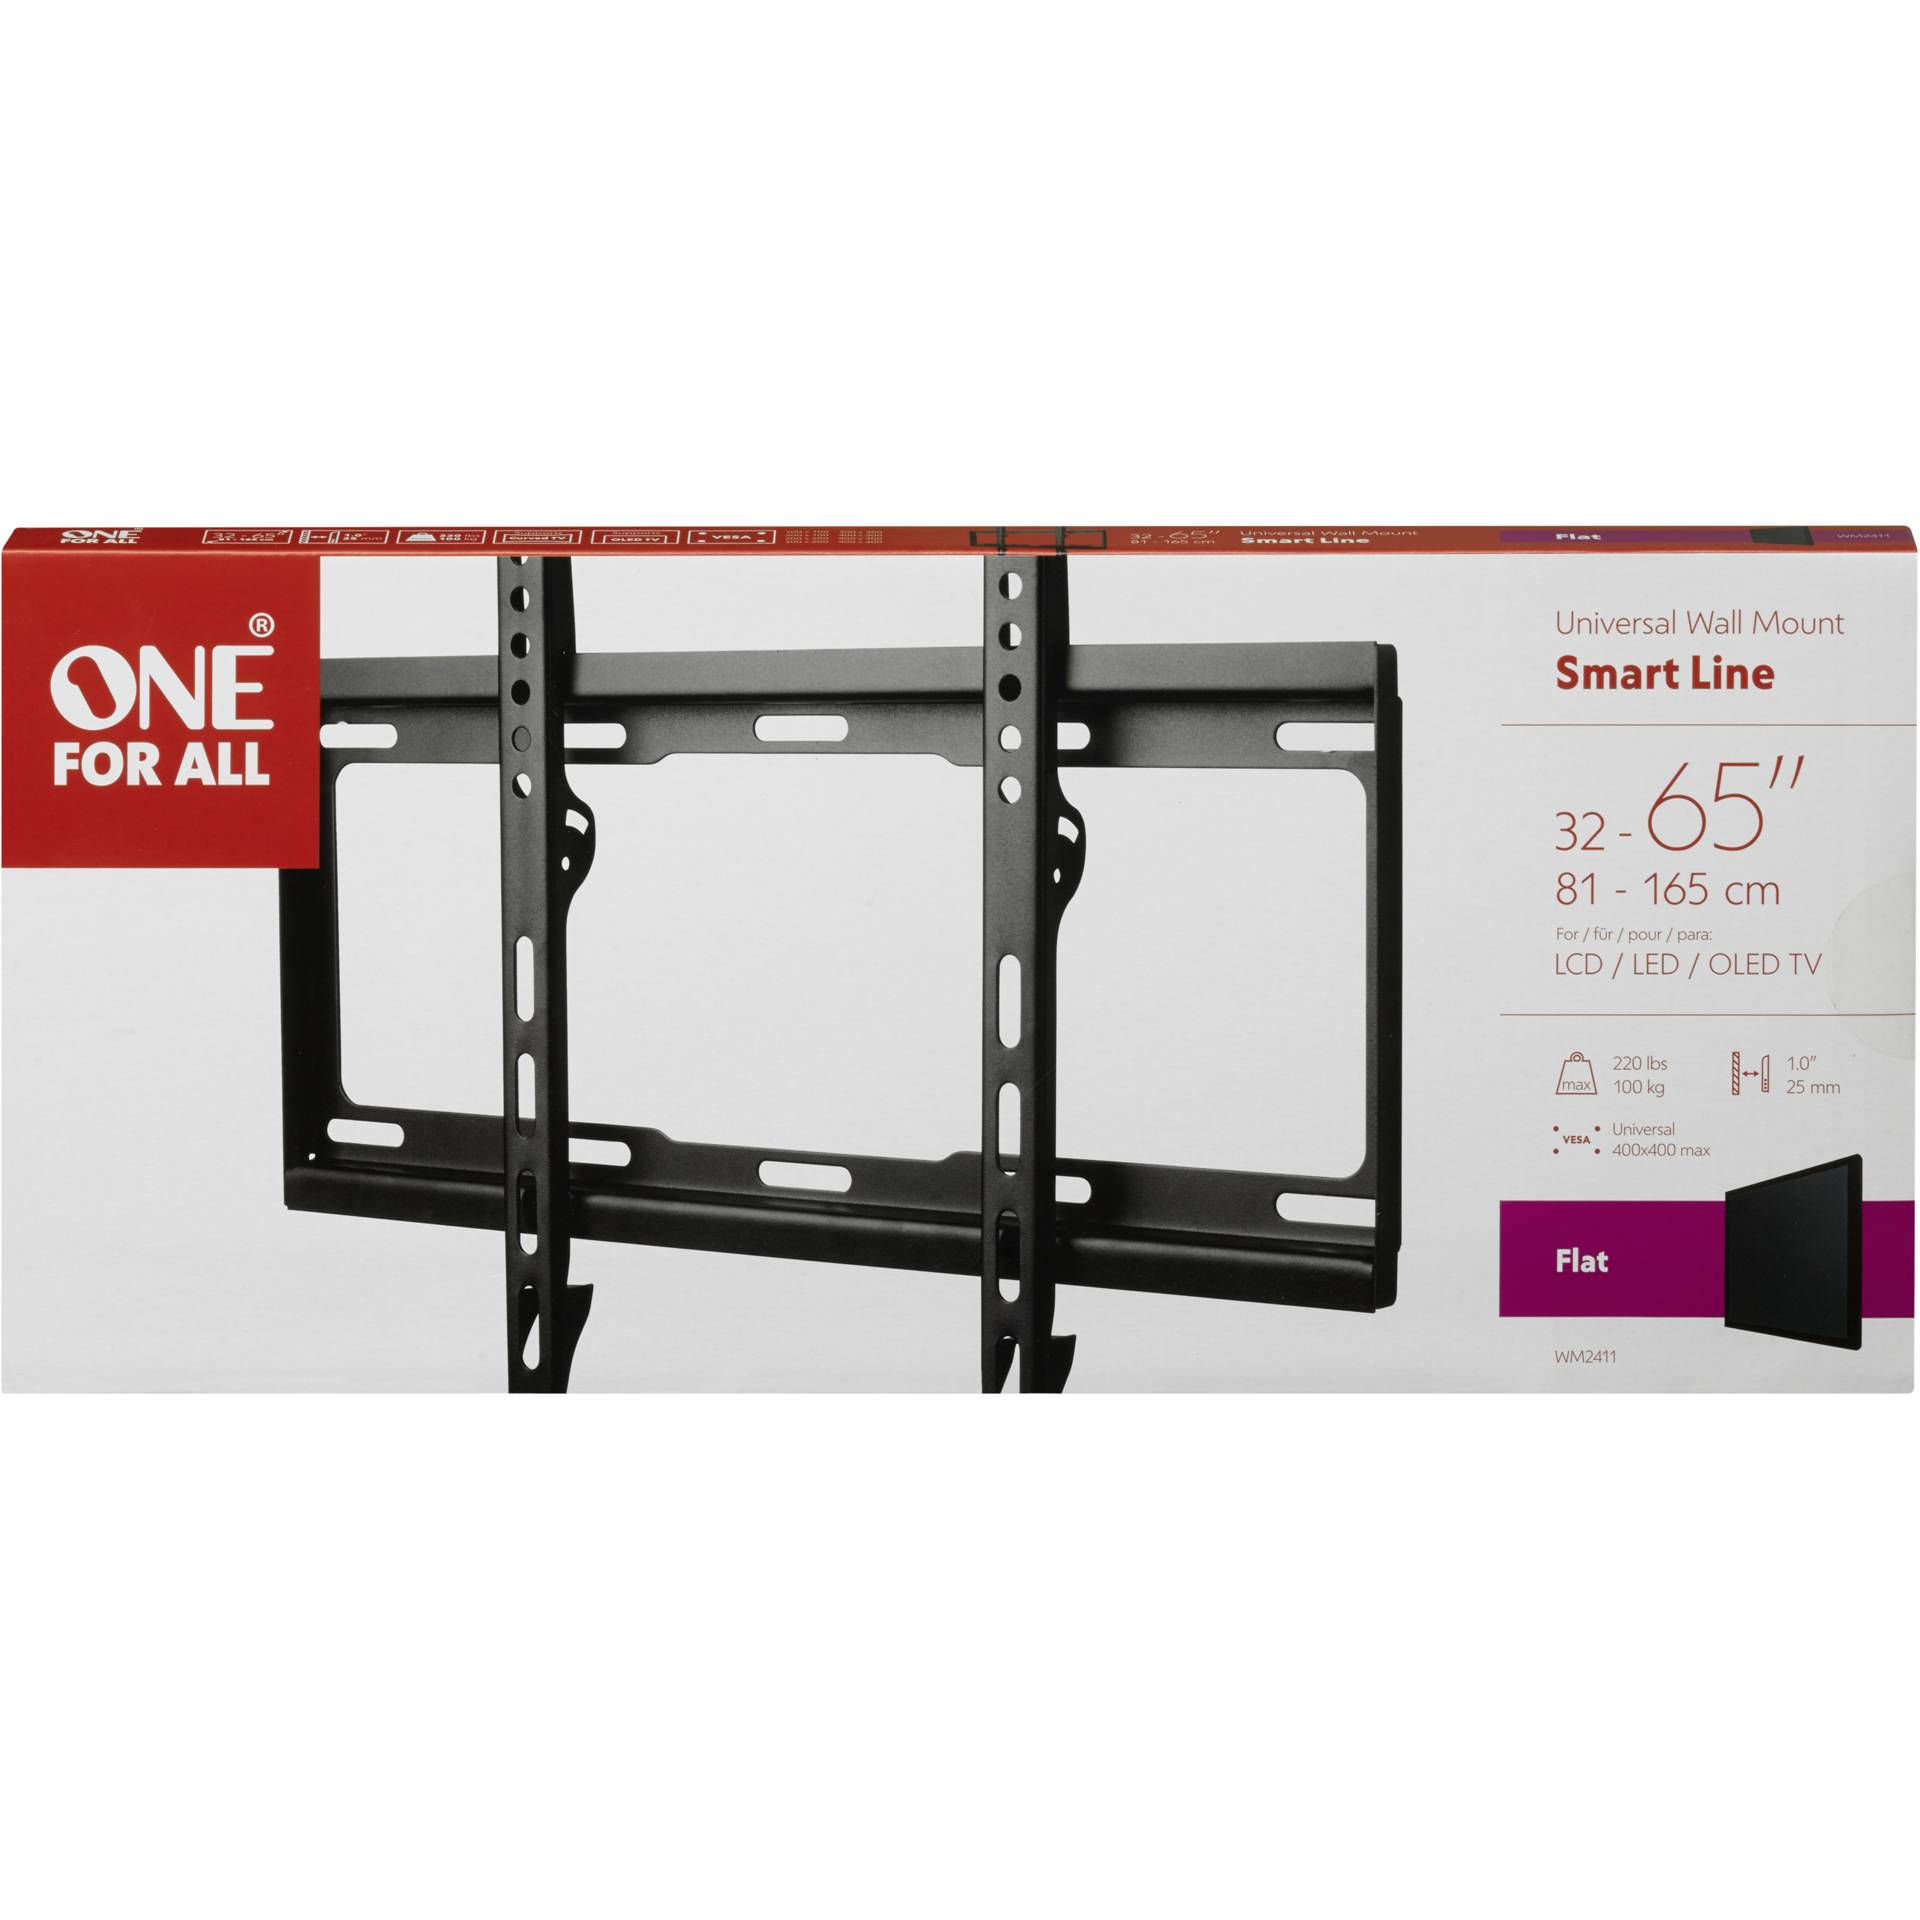 One for All TV supp. murale 55 Smart Flat